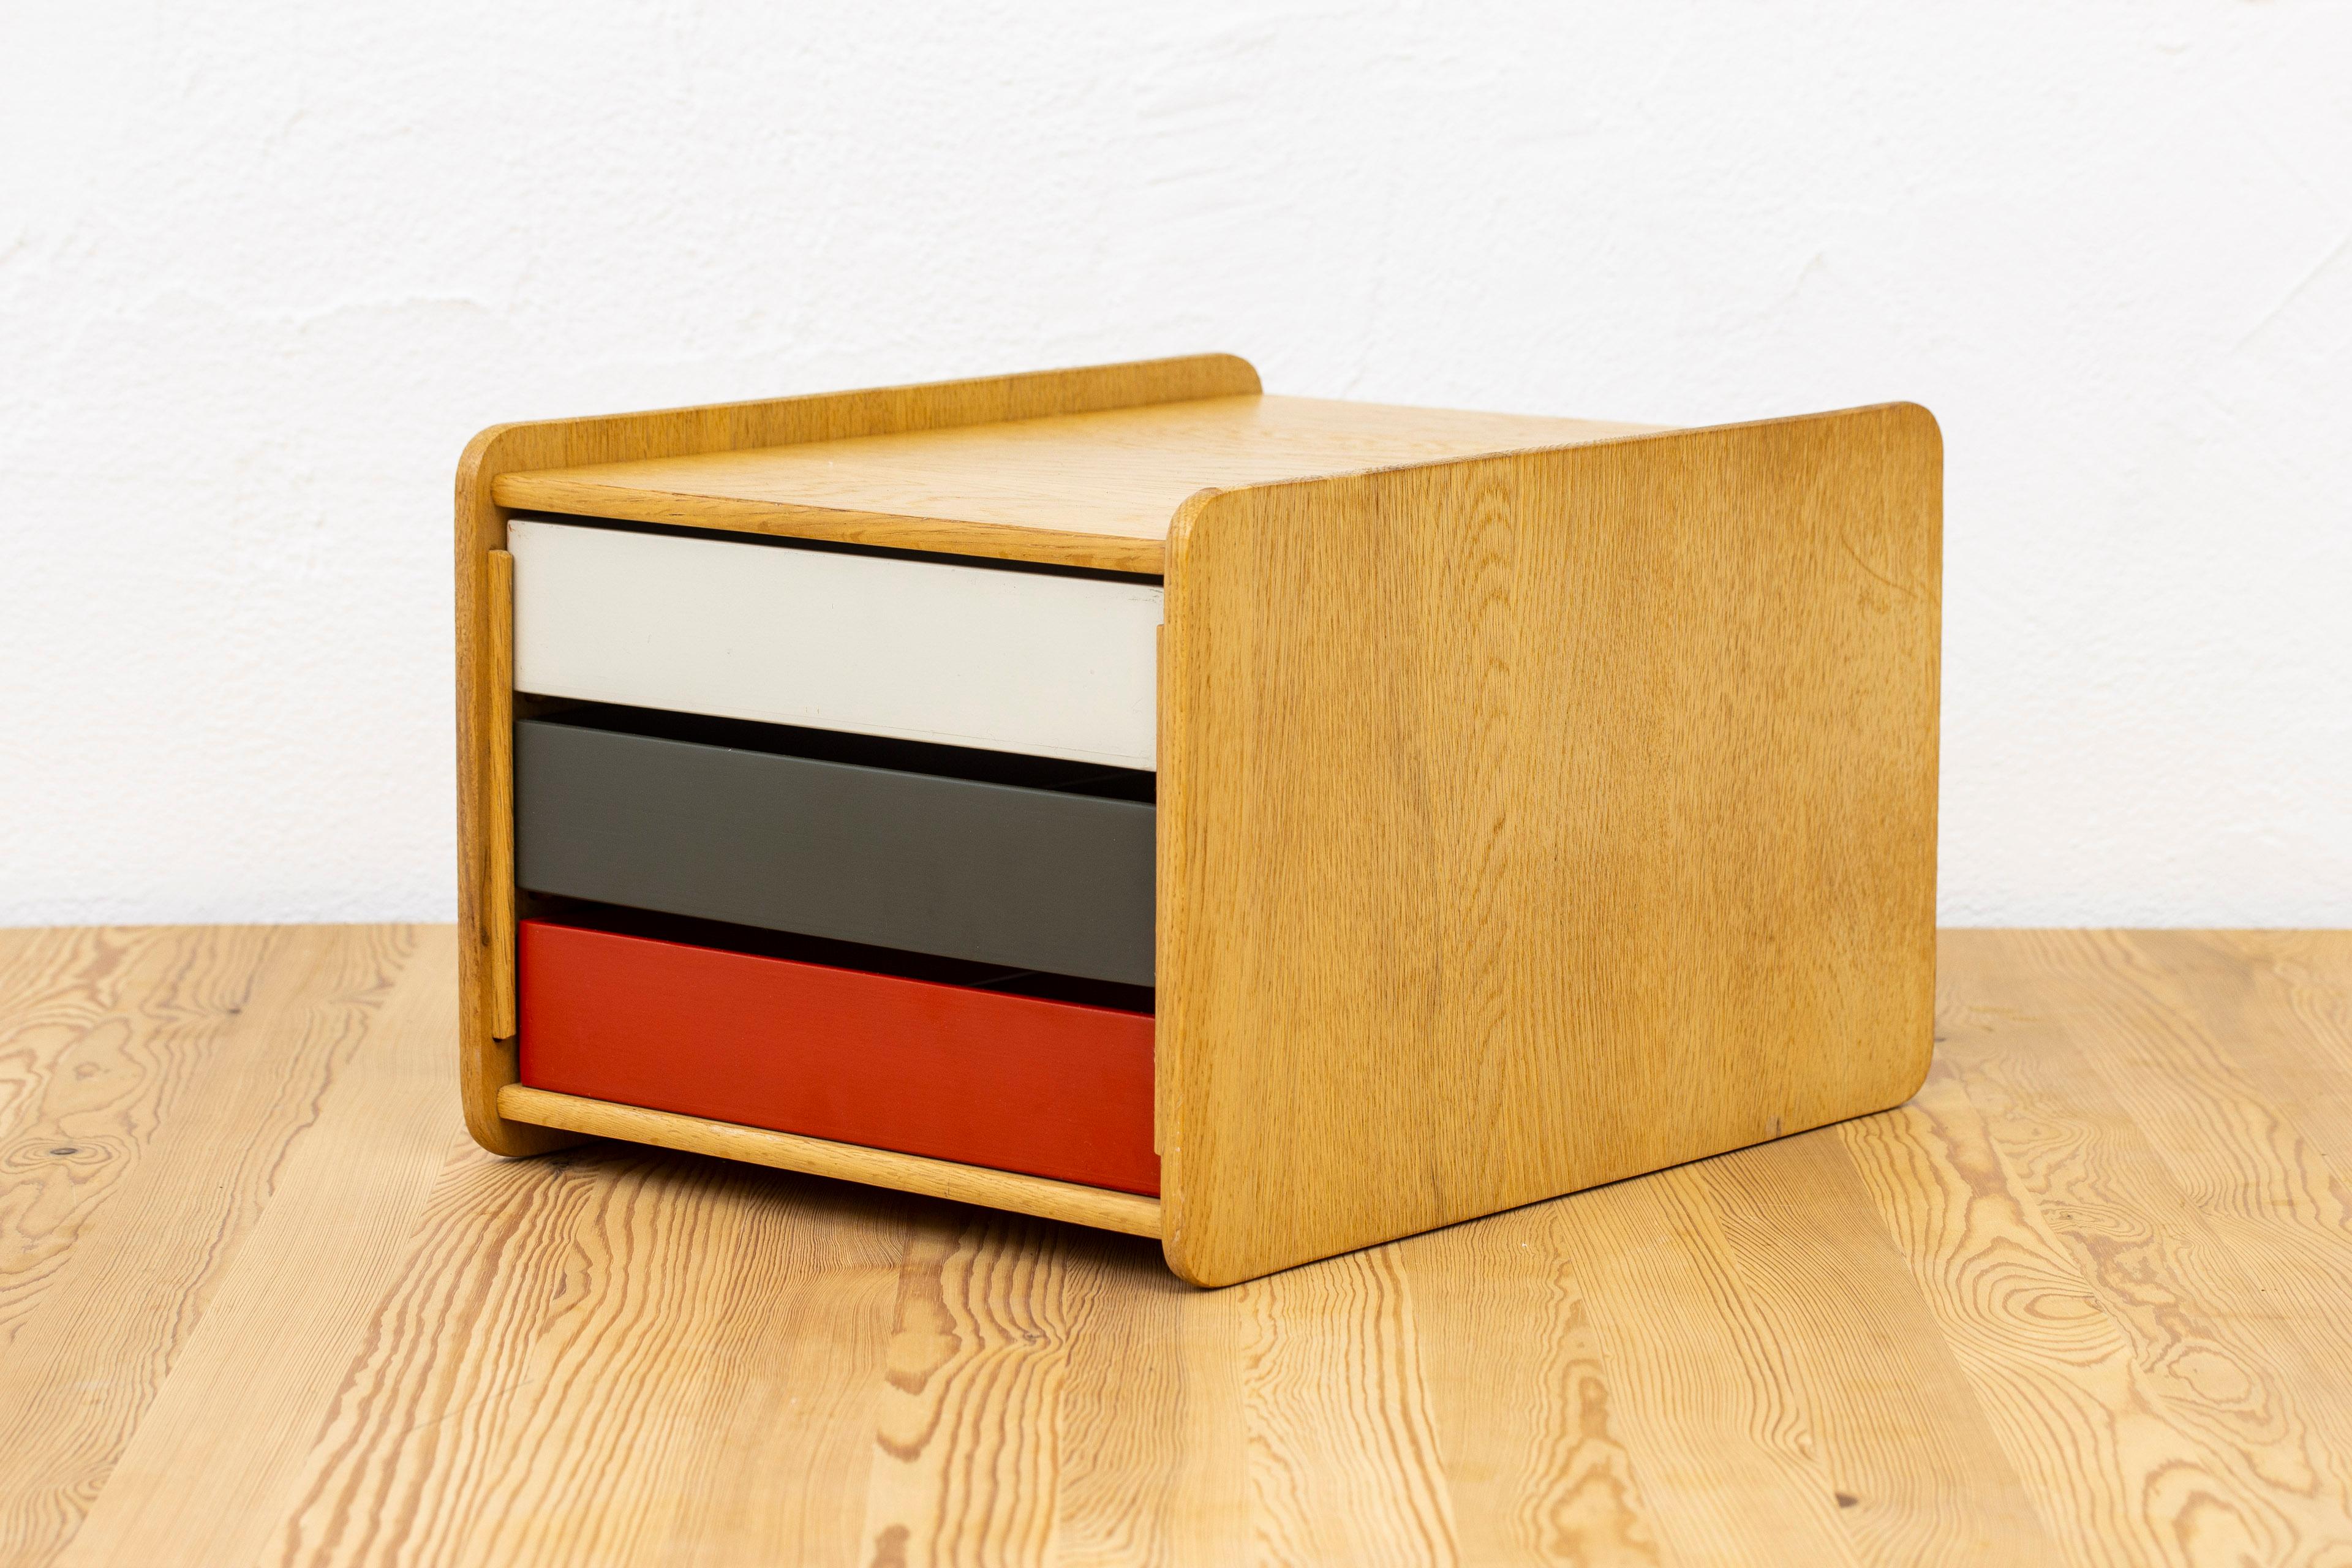 Desk organizer designed by Børge Mogensen. Produced in Sweden by Karl Andersson & Söner during the 1950s. Made from solid light oak with insert boxes in red, white and grey/green painted wood. Very good vintage condition with some age related wear